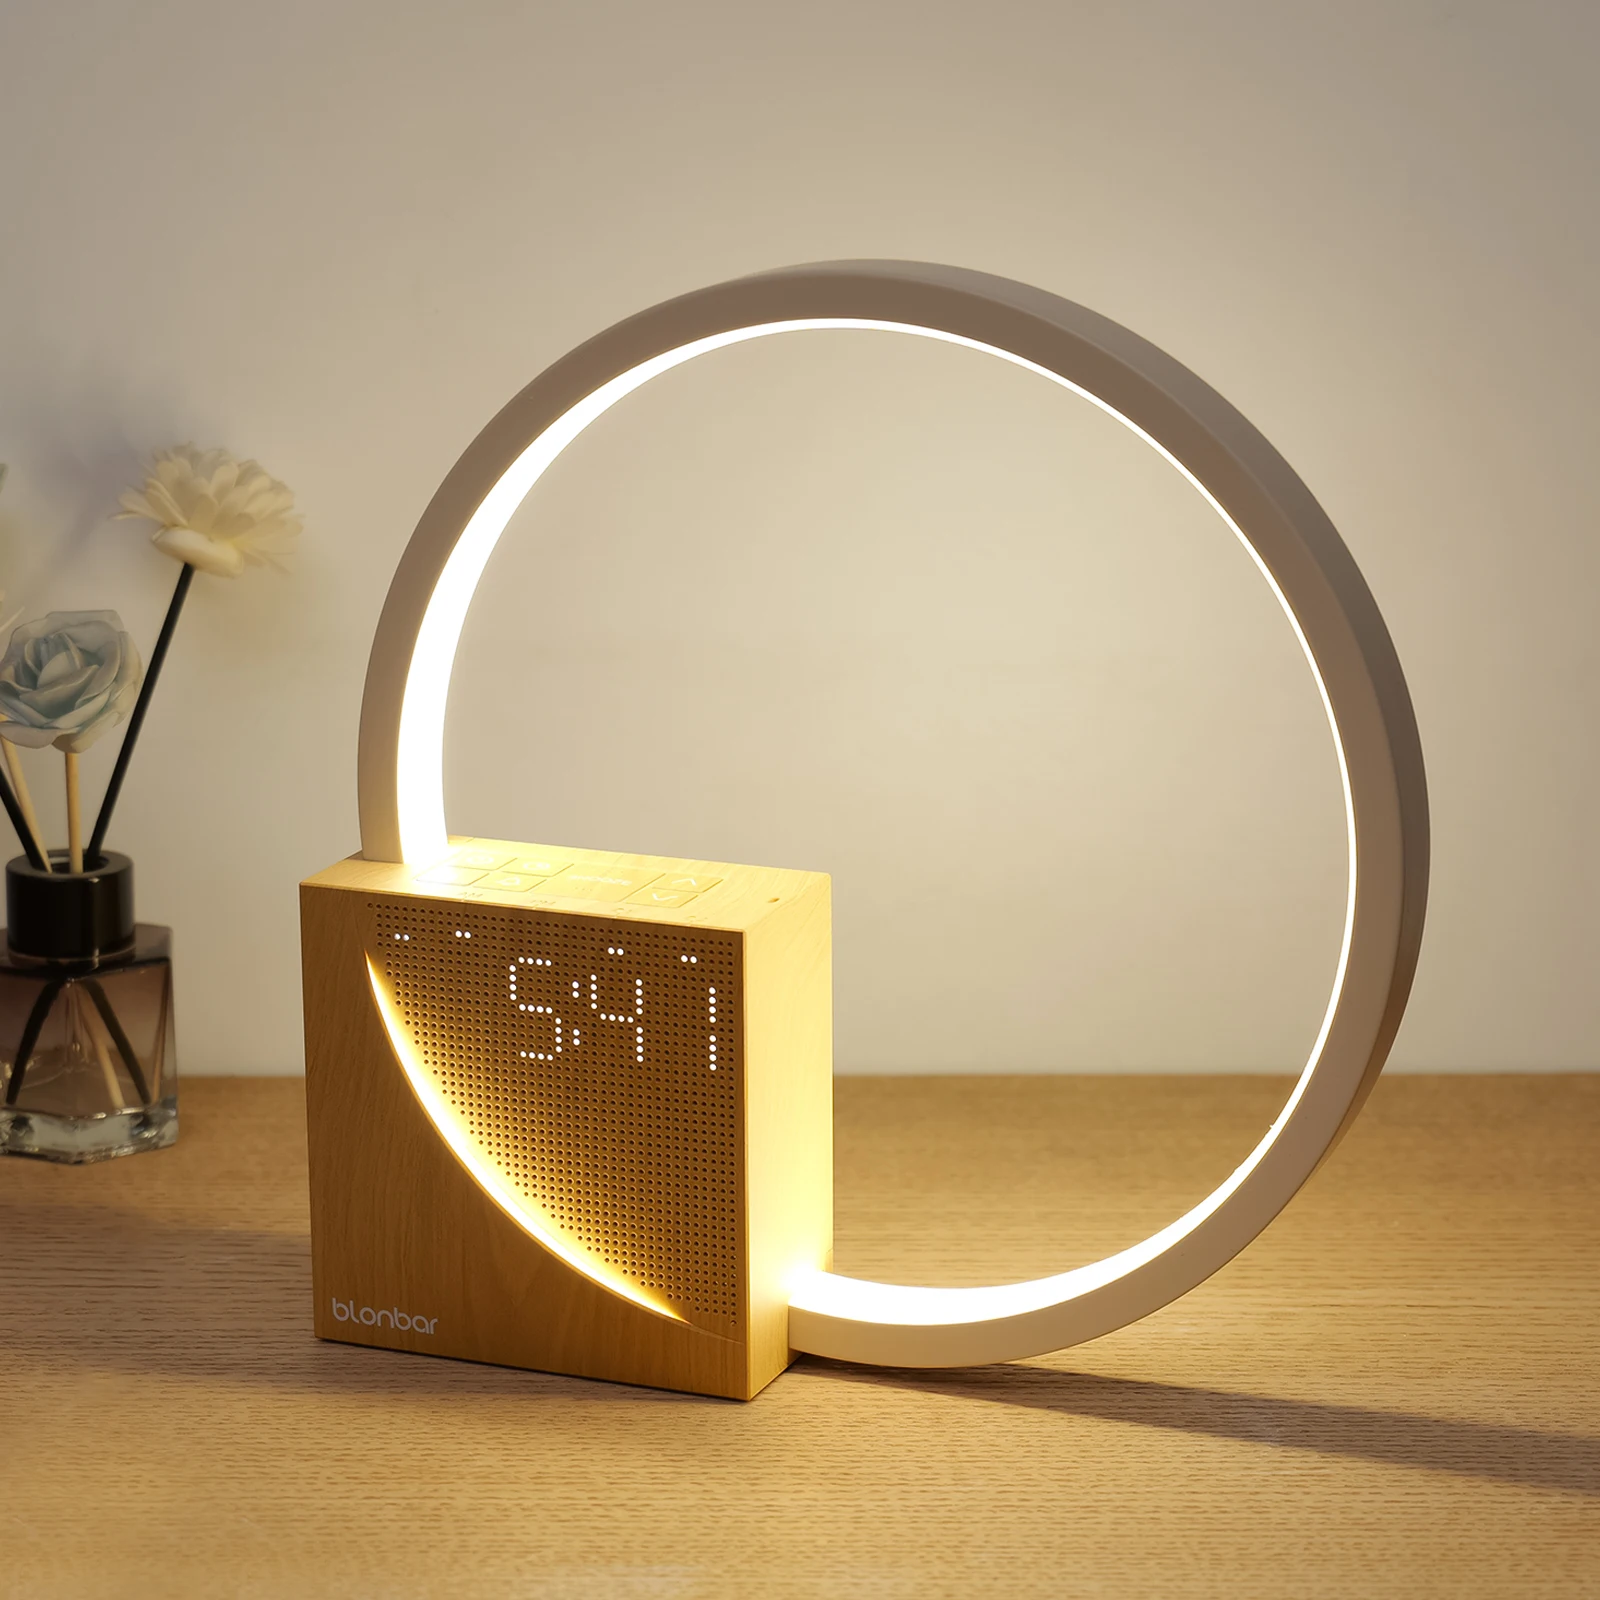 blonbar Bedside Lamp, Touch Lamps Bedside with 10W USB Charging Port, 10 - $66.05